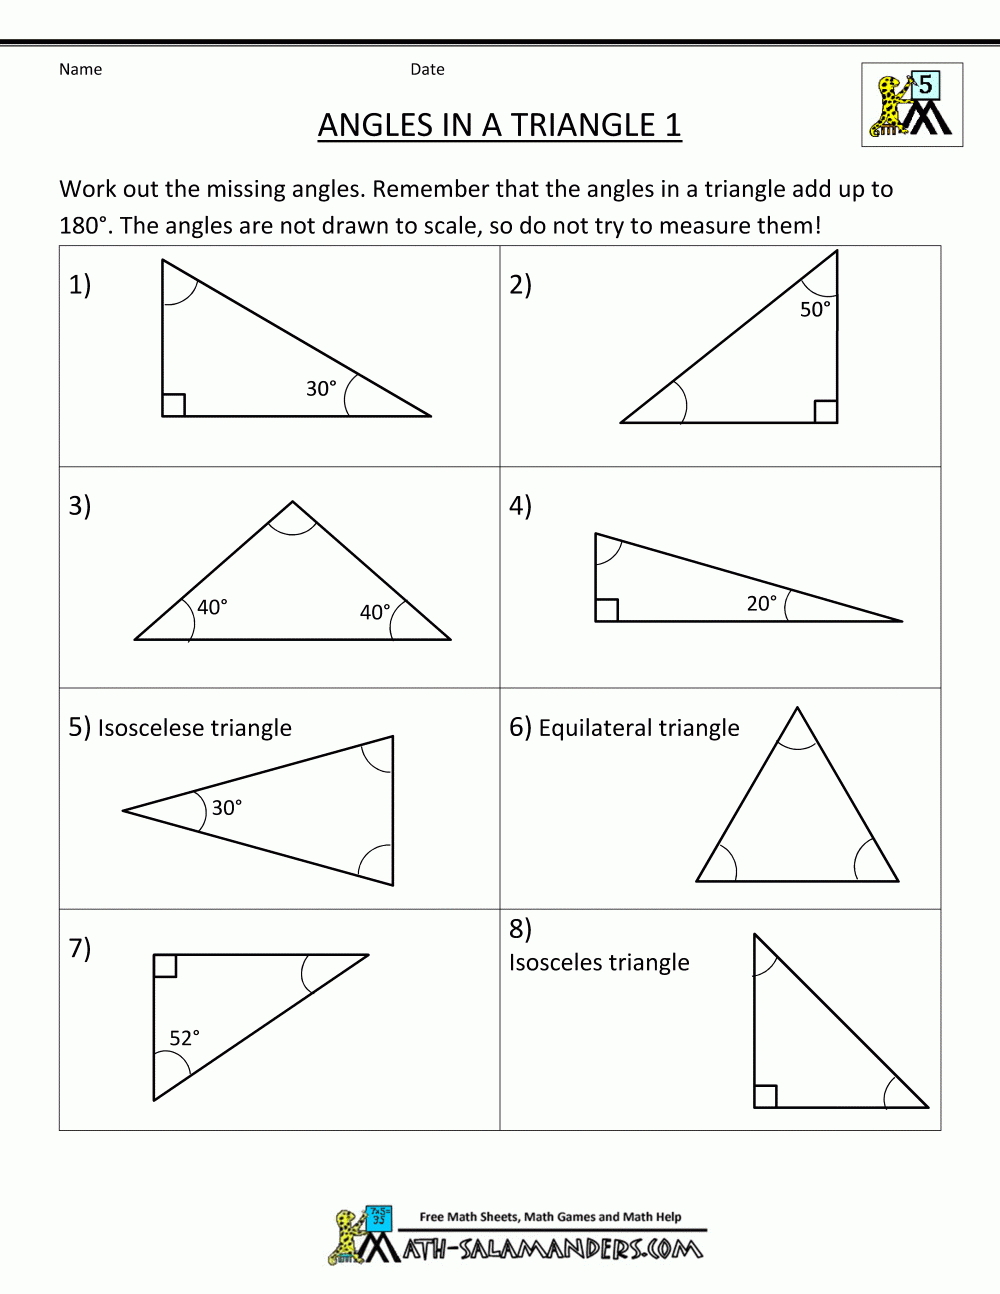 Free Printable Geometry Sheets Angles In A Triangle 1 | Geometry - Free Printable Geometry Worksheets For Middle School